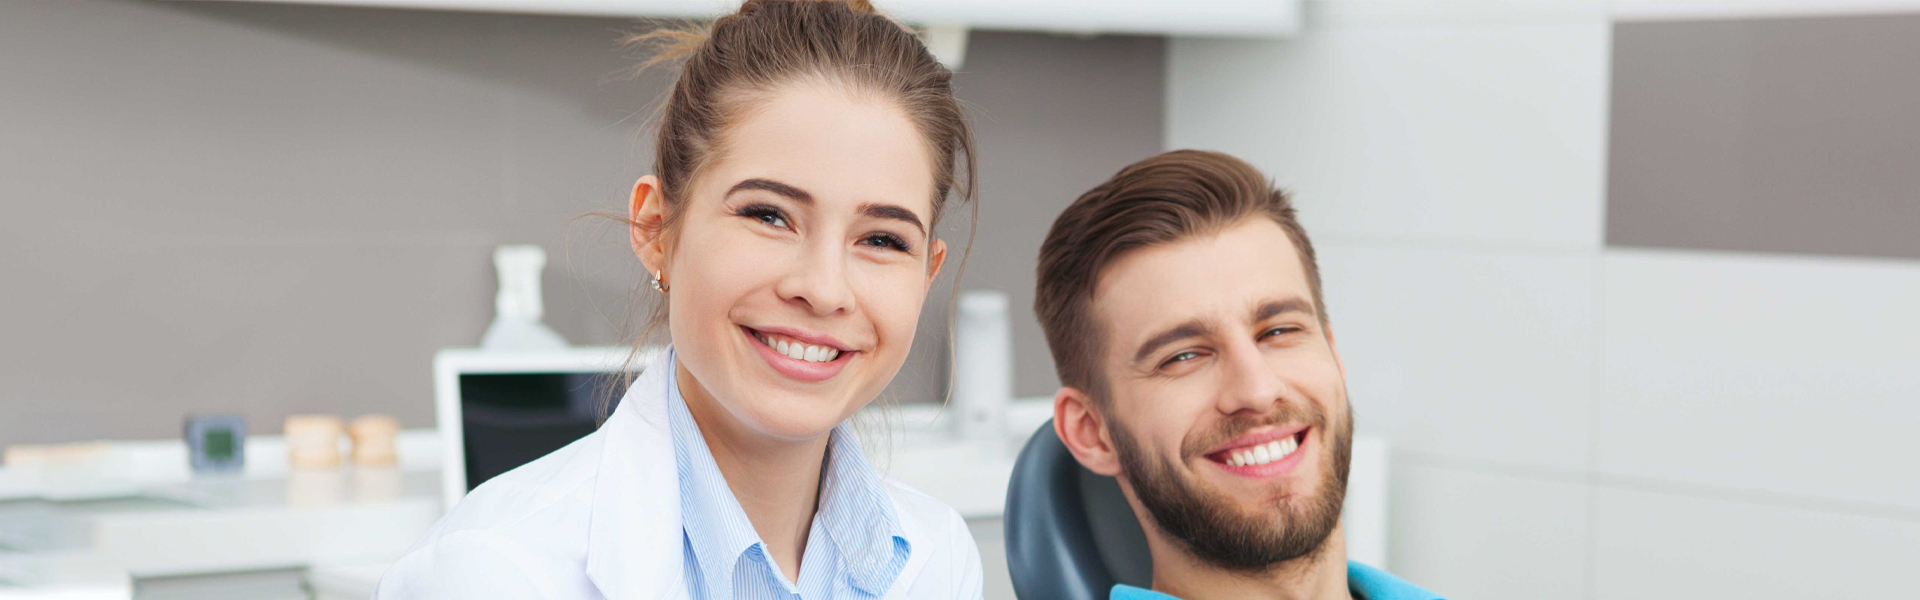 7 Benefits of Sedation Dentistry You Should Know